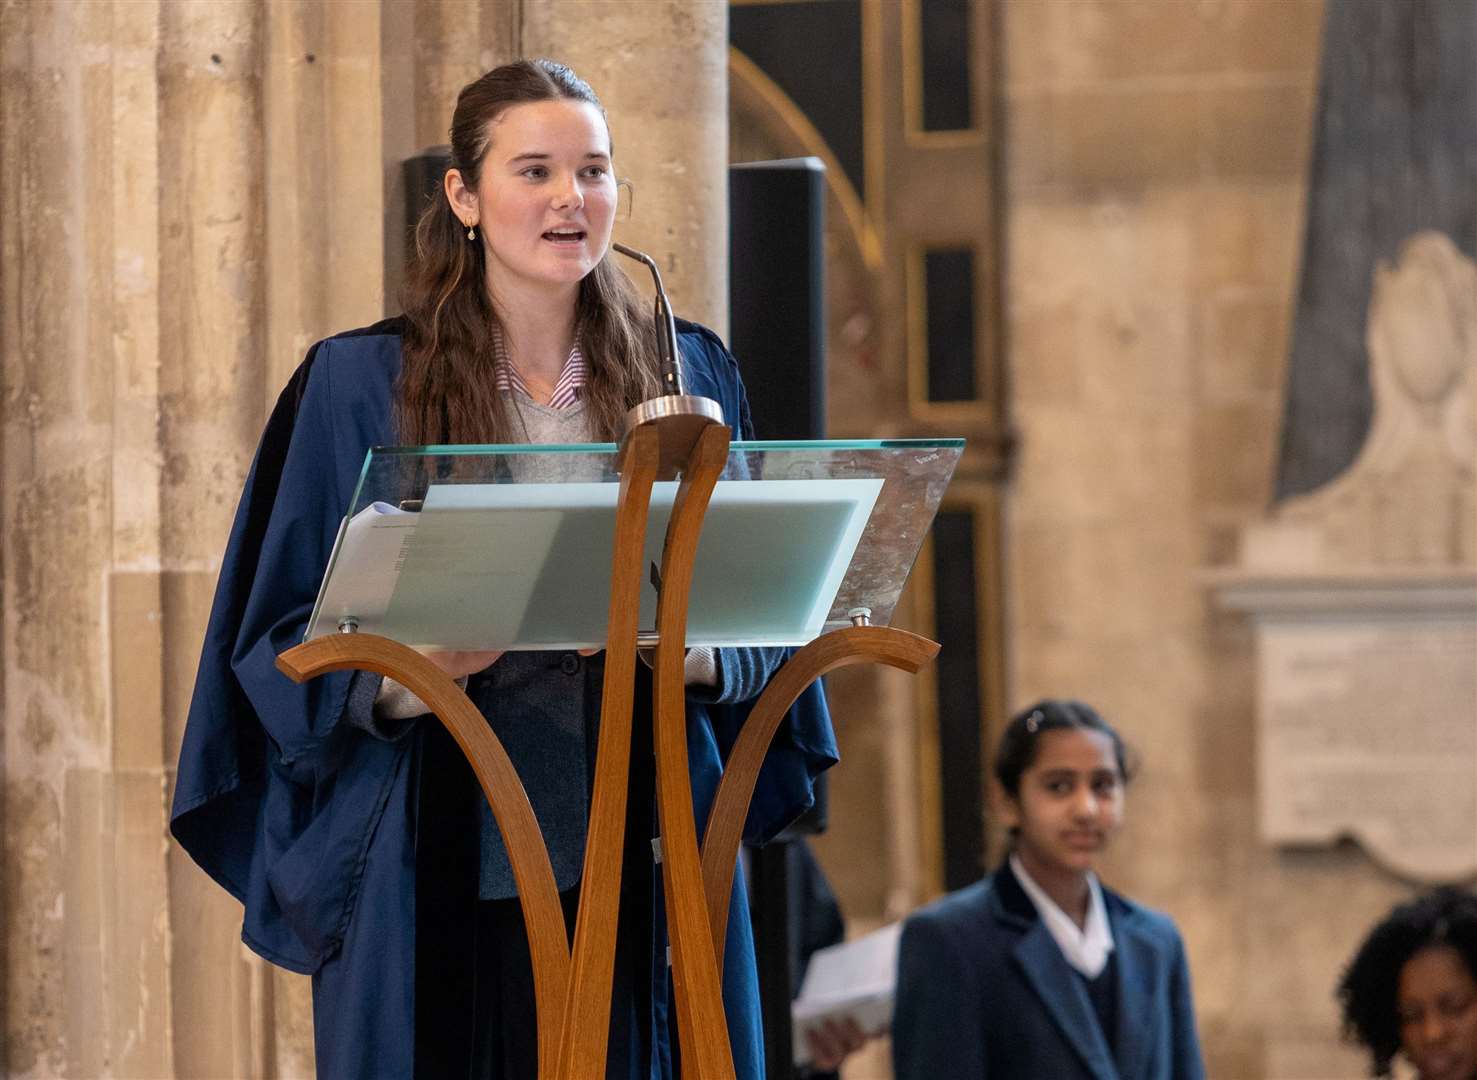 Benenden School's head girl also spoke during the centenary service at Canterbury Cathedral